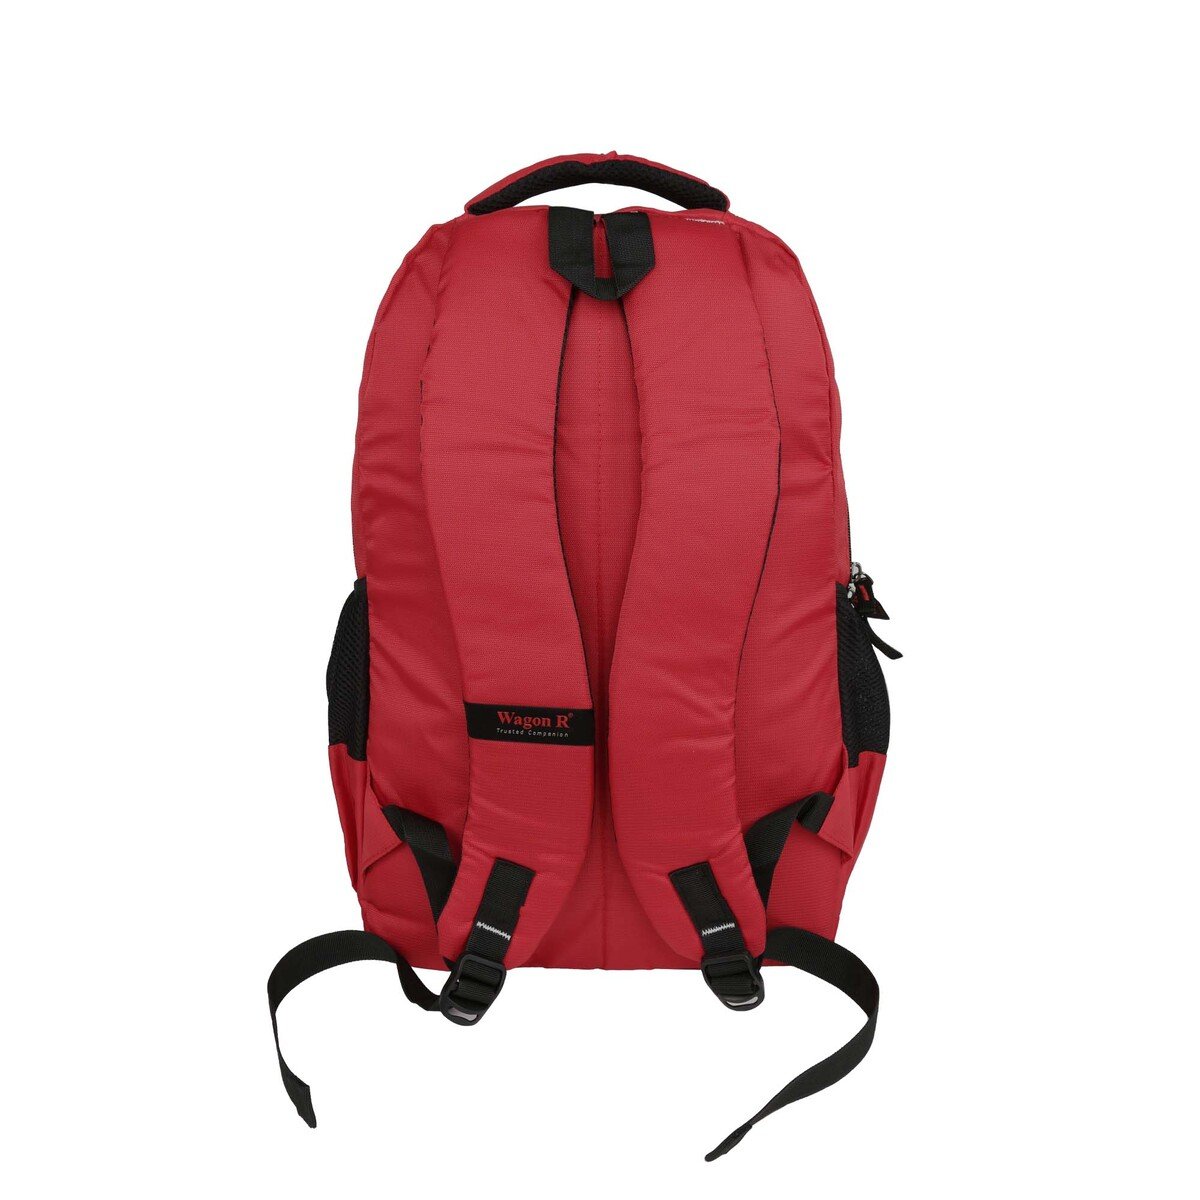 Wagon-R Radiant Backpack 1350 19 Inch